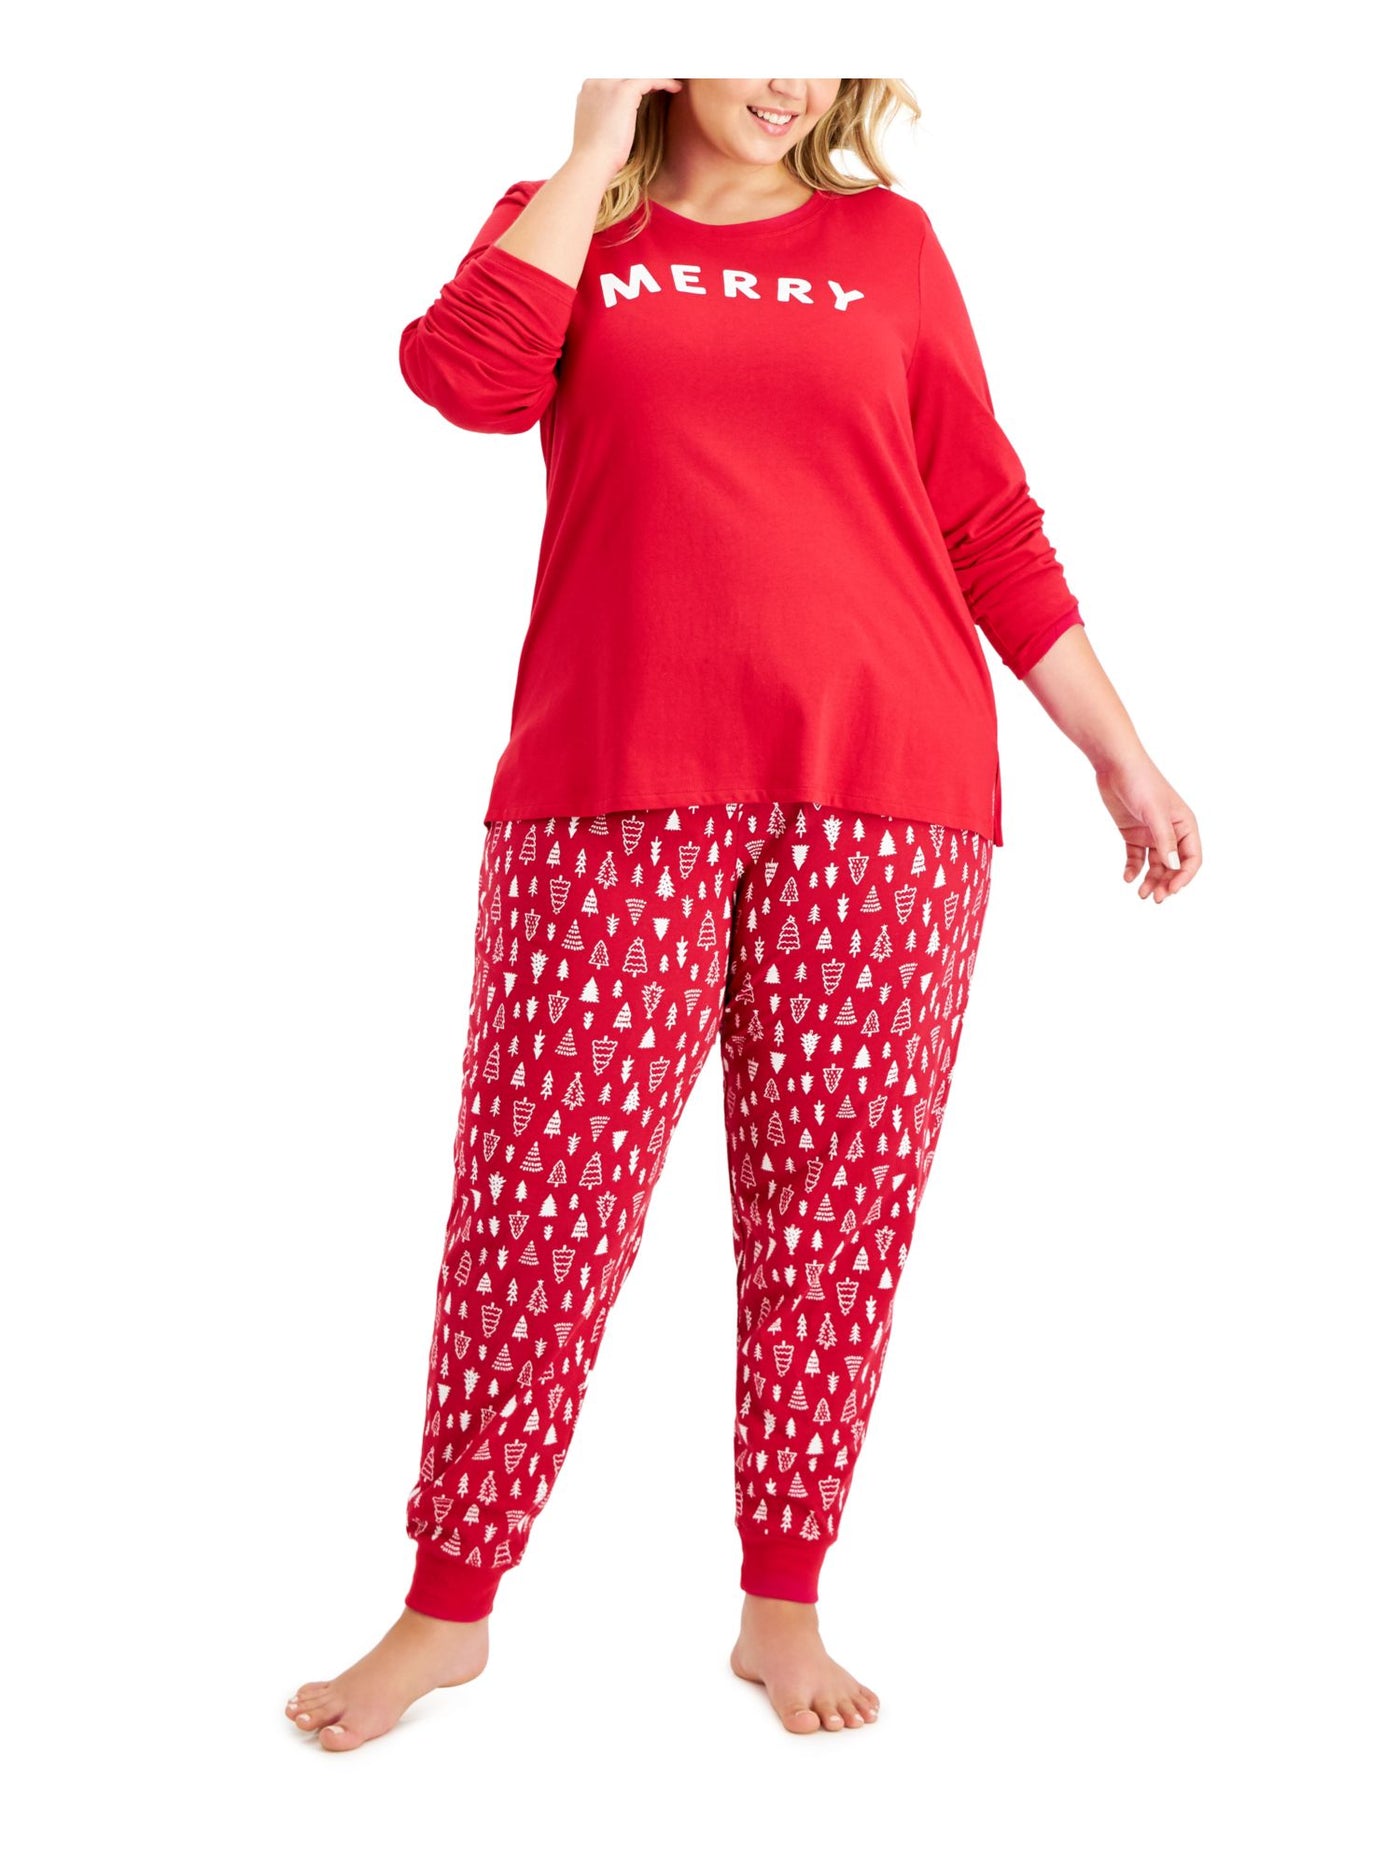 FAMILY PJs Womens Red Graphic Elastic Band Long Sleeve T-Shirt Top Cuffed Pants Pajamas Plus 3X